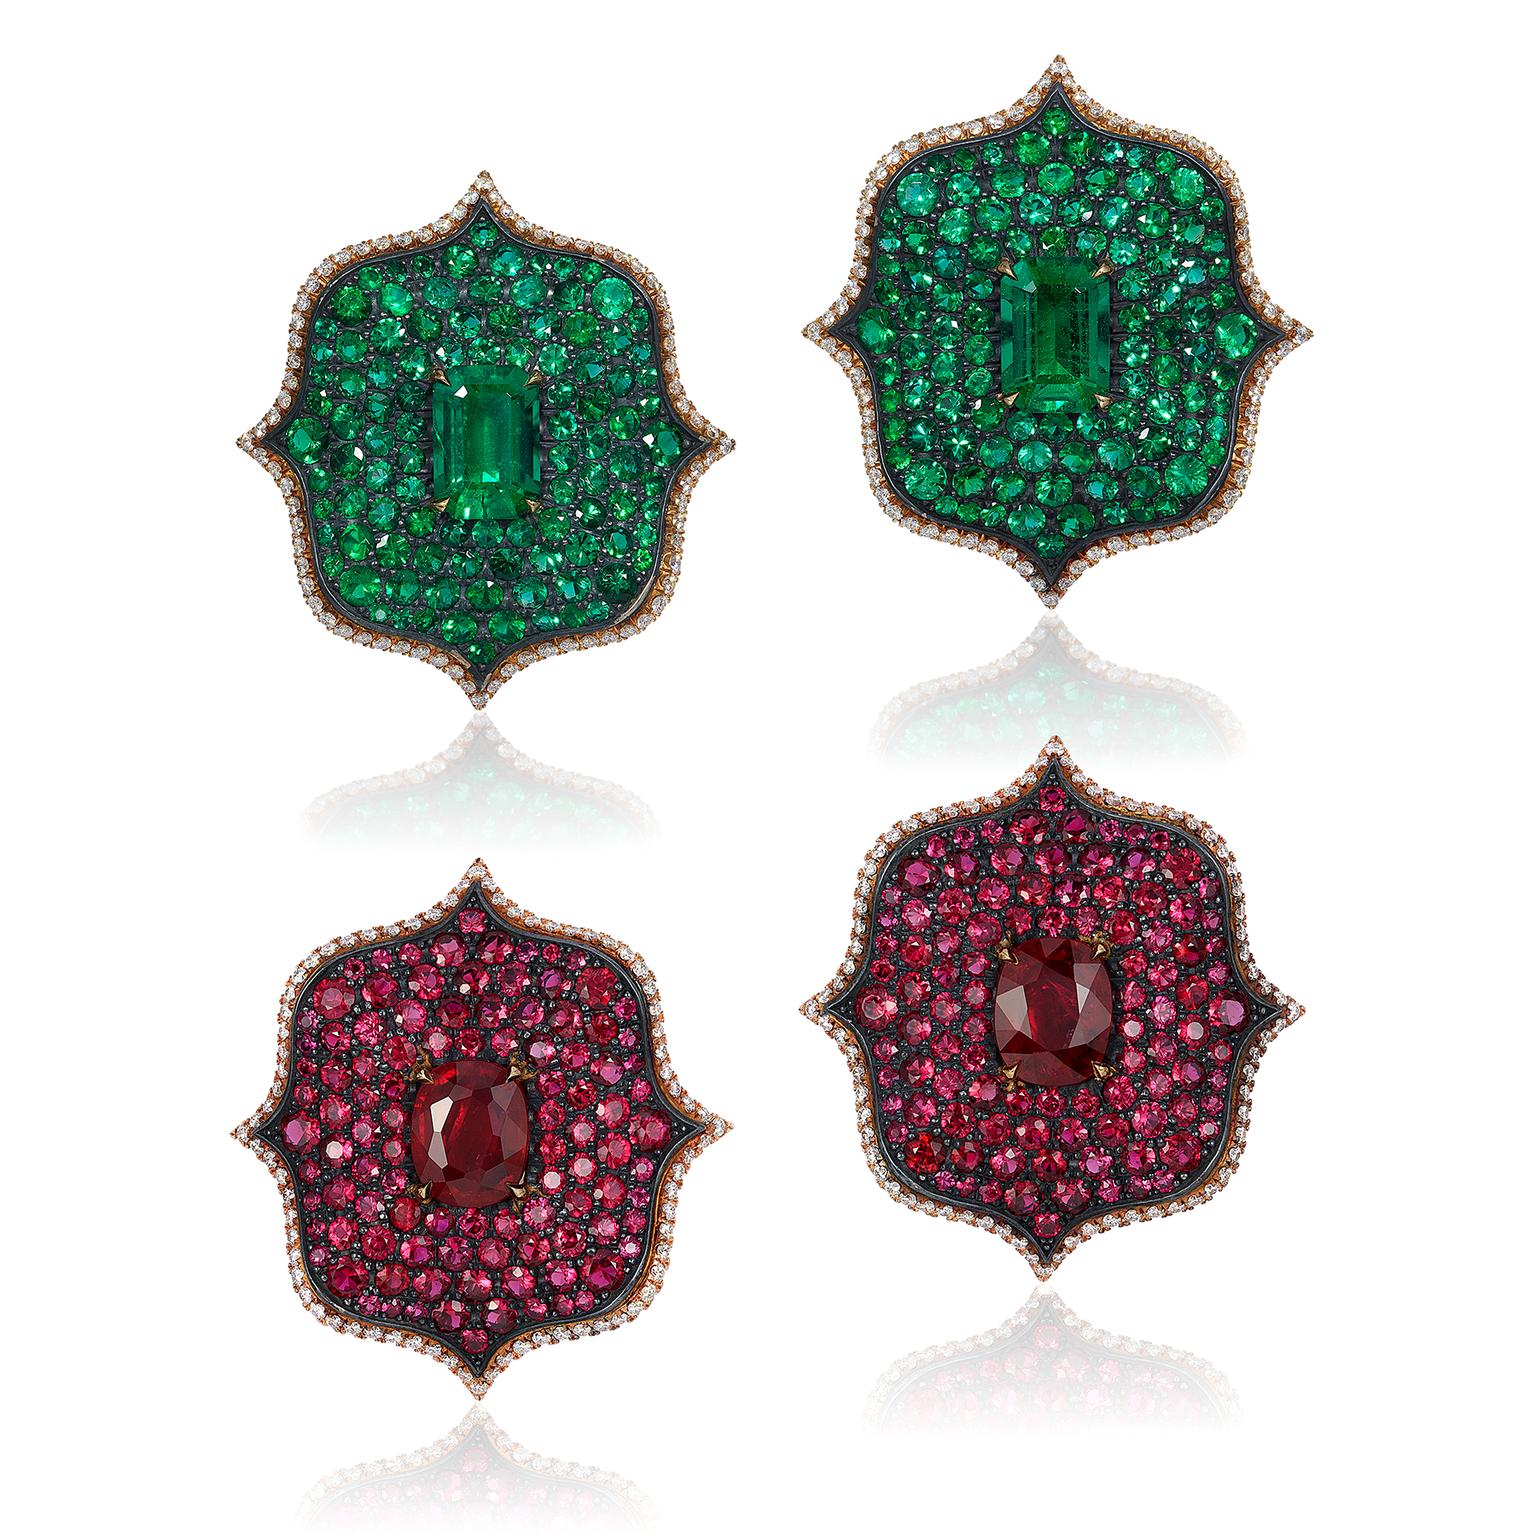 Bayco Monochrome Lotus earrings with emeralds and rubies